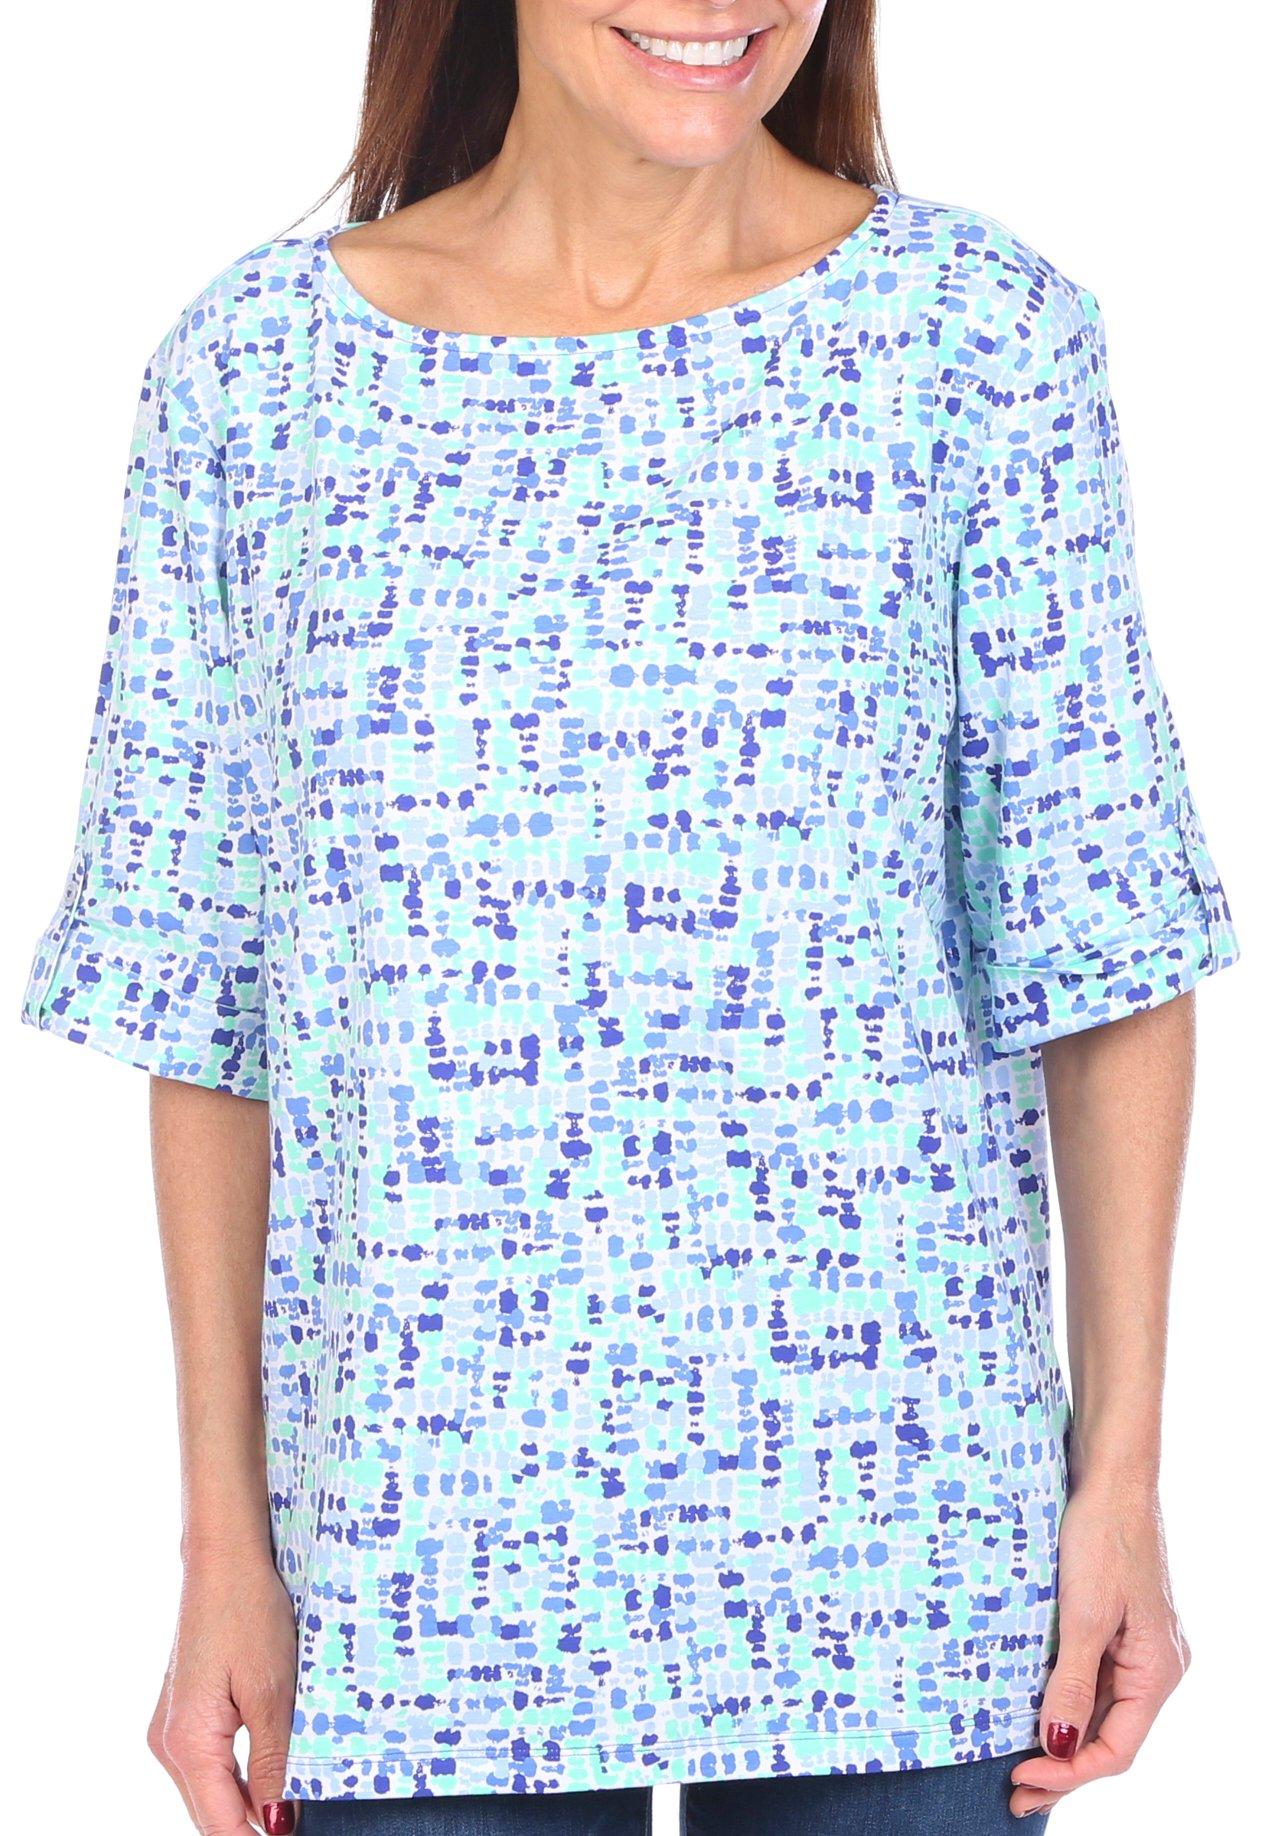 Coral Bay Womens Abstract Print Boat Neck Elbow